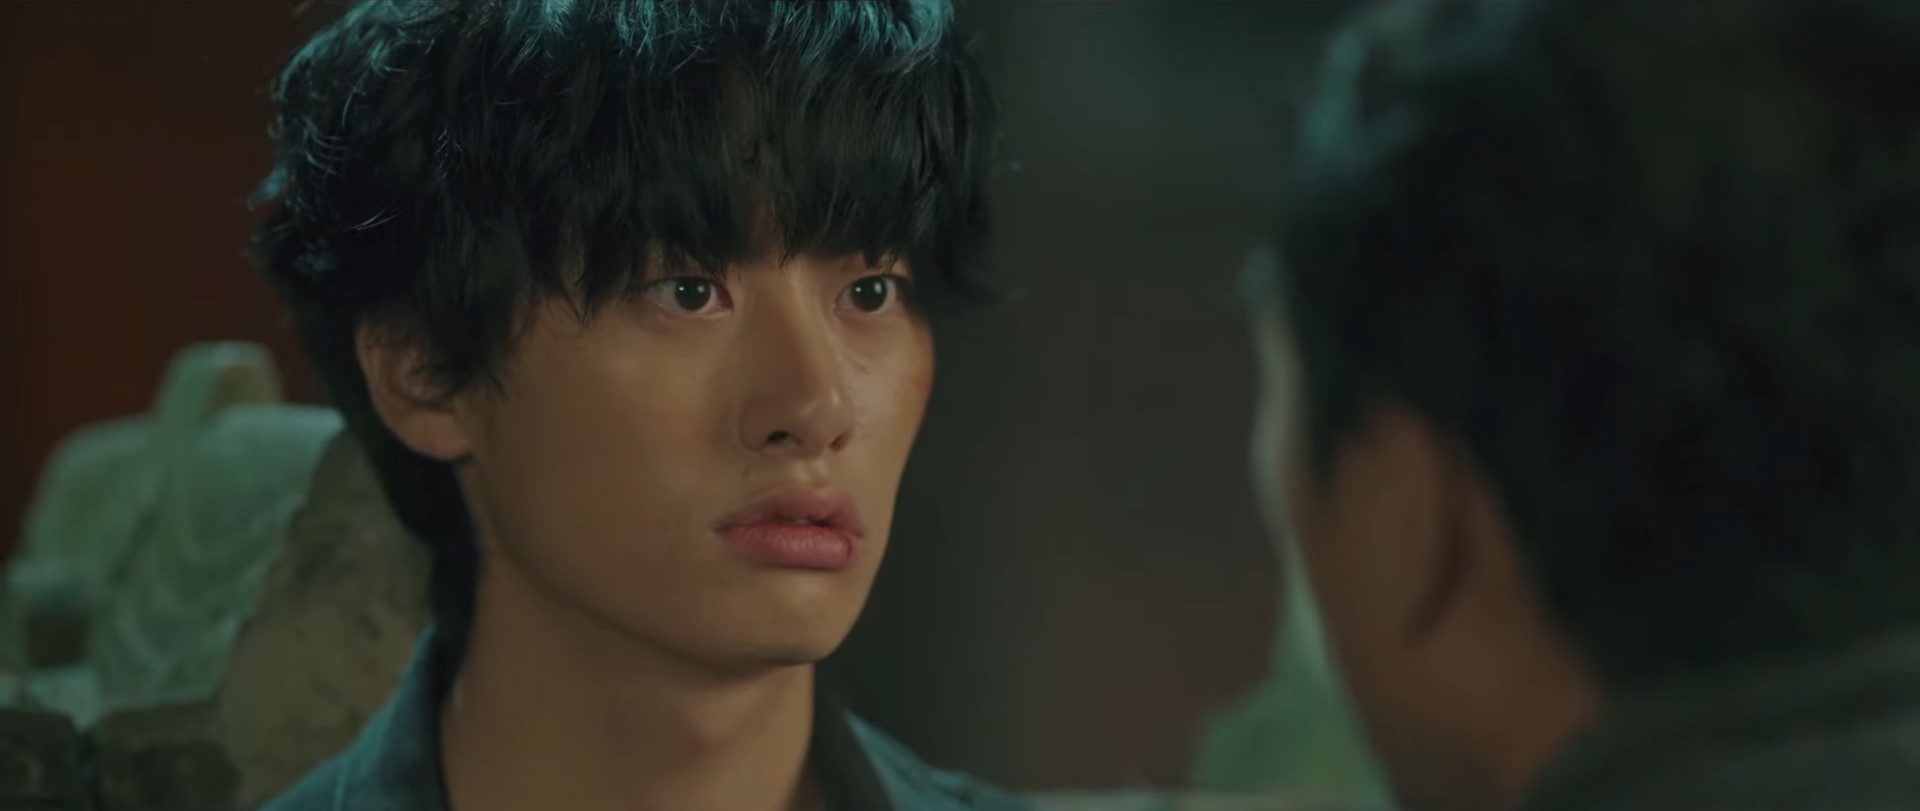 My Perfect Stranger Episode 9 Recap/Review: The Story Behind the Lock and Key